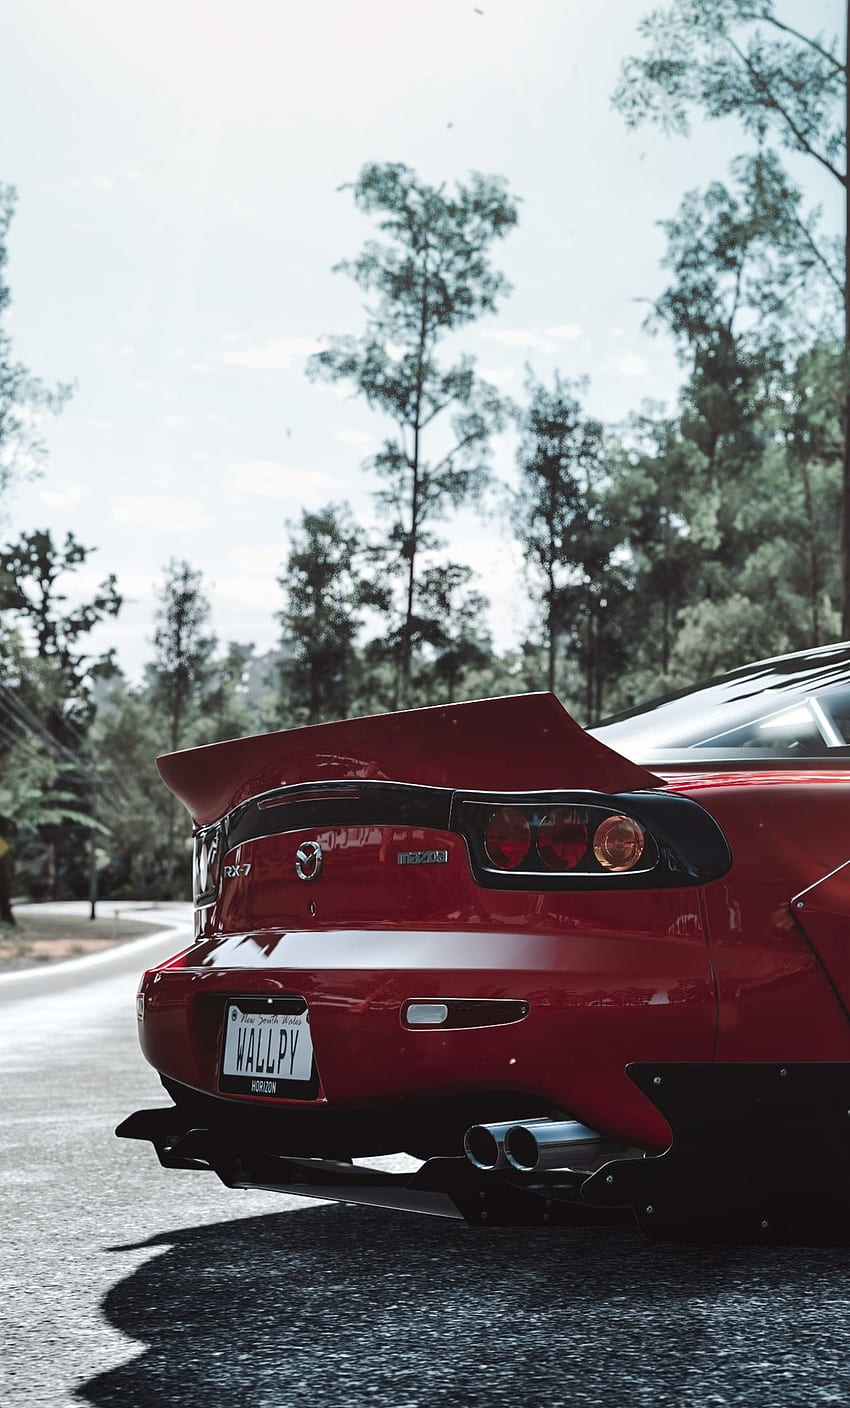 40+ Mazda RX-7 HD Wallpapers and Backgrounds